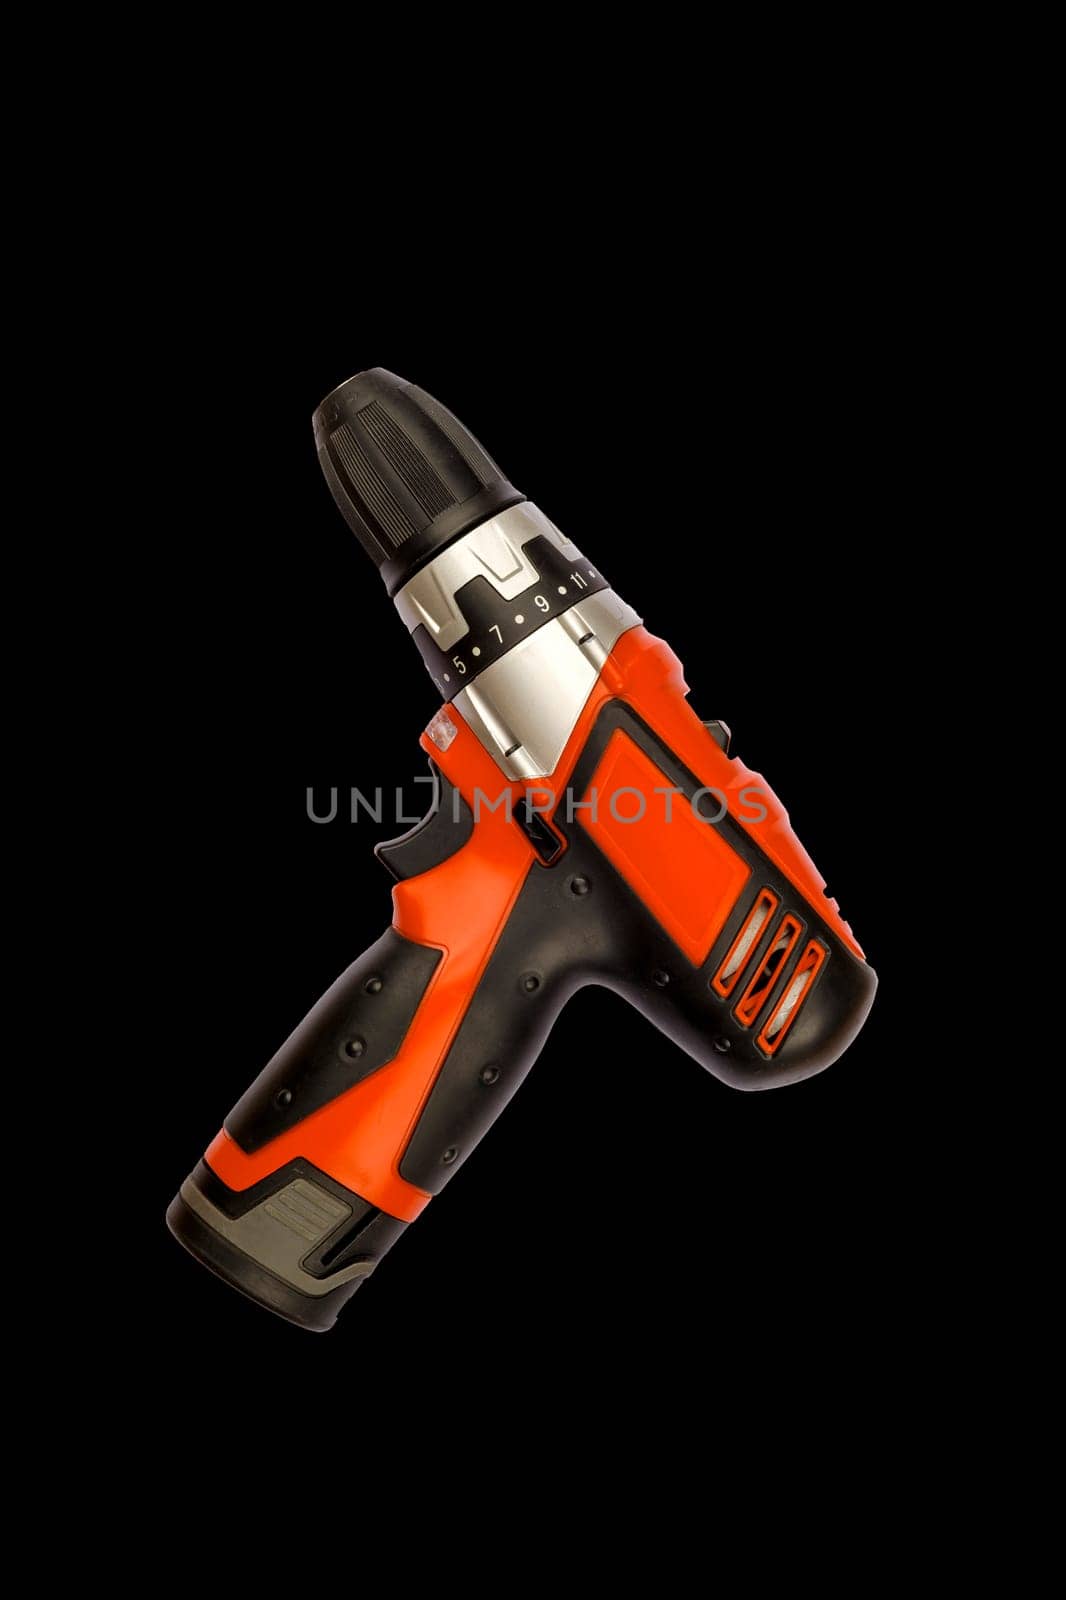 Cordless drill screwdriver isolated on black background. Professional tool by EdVal